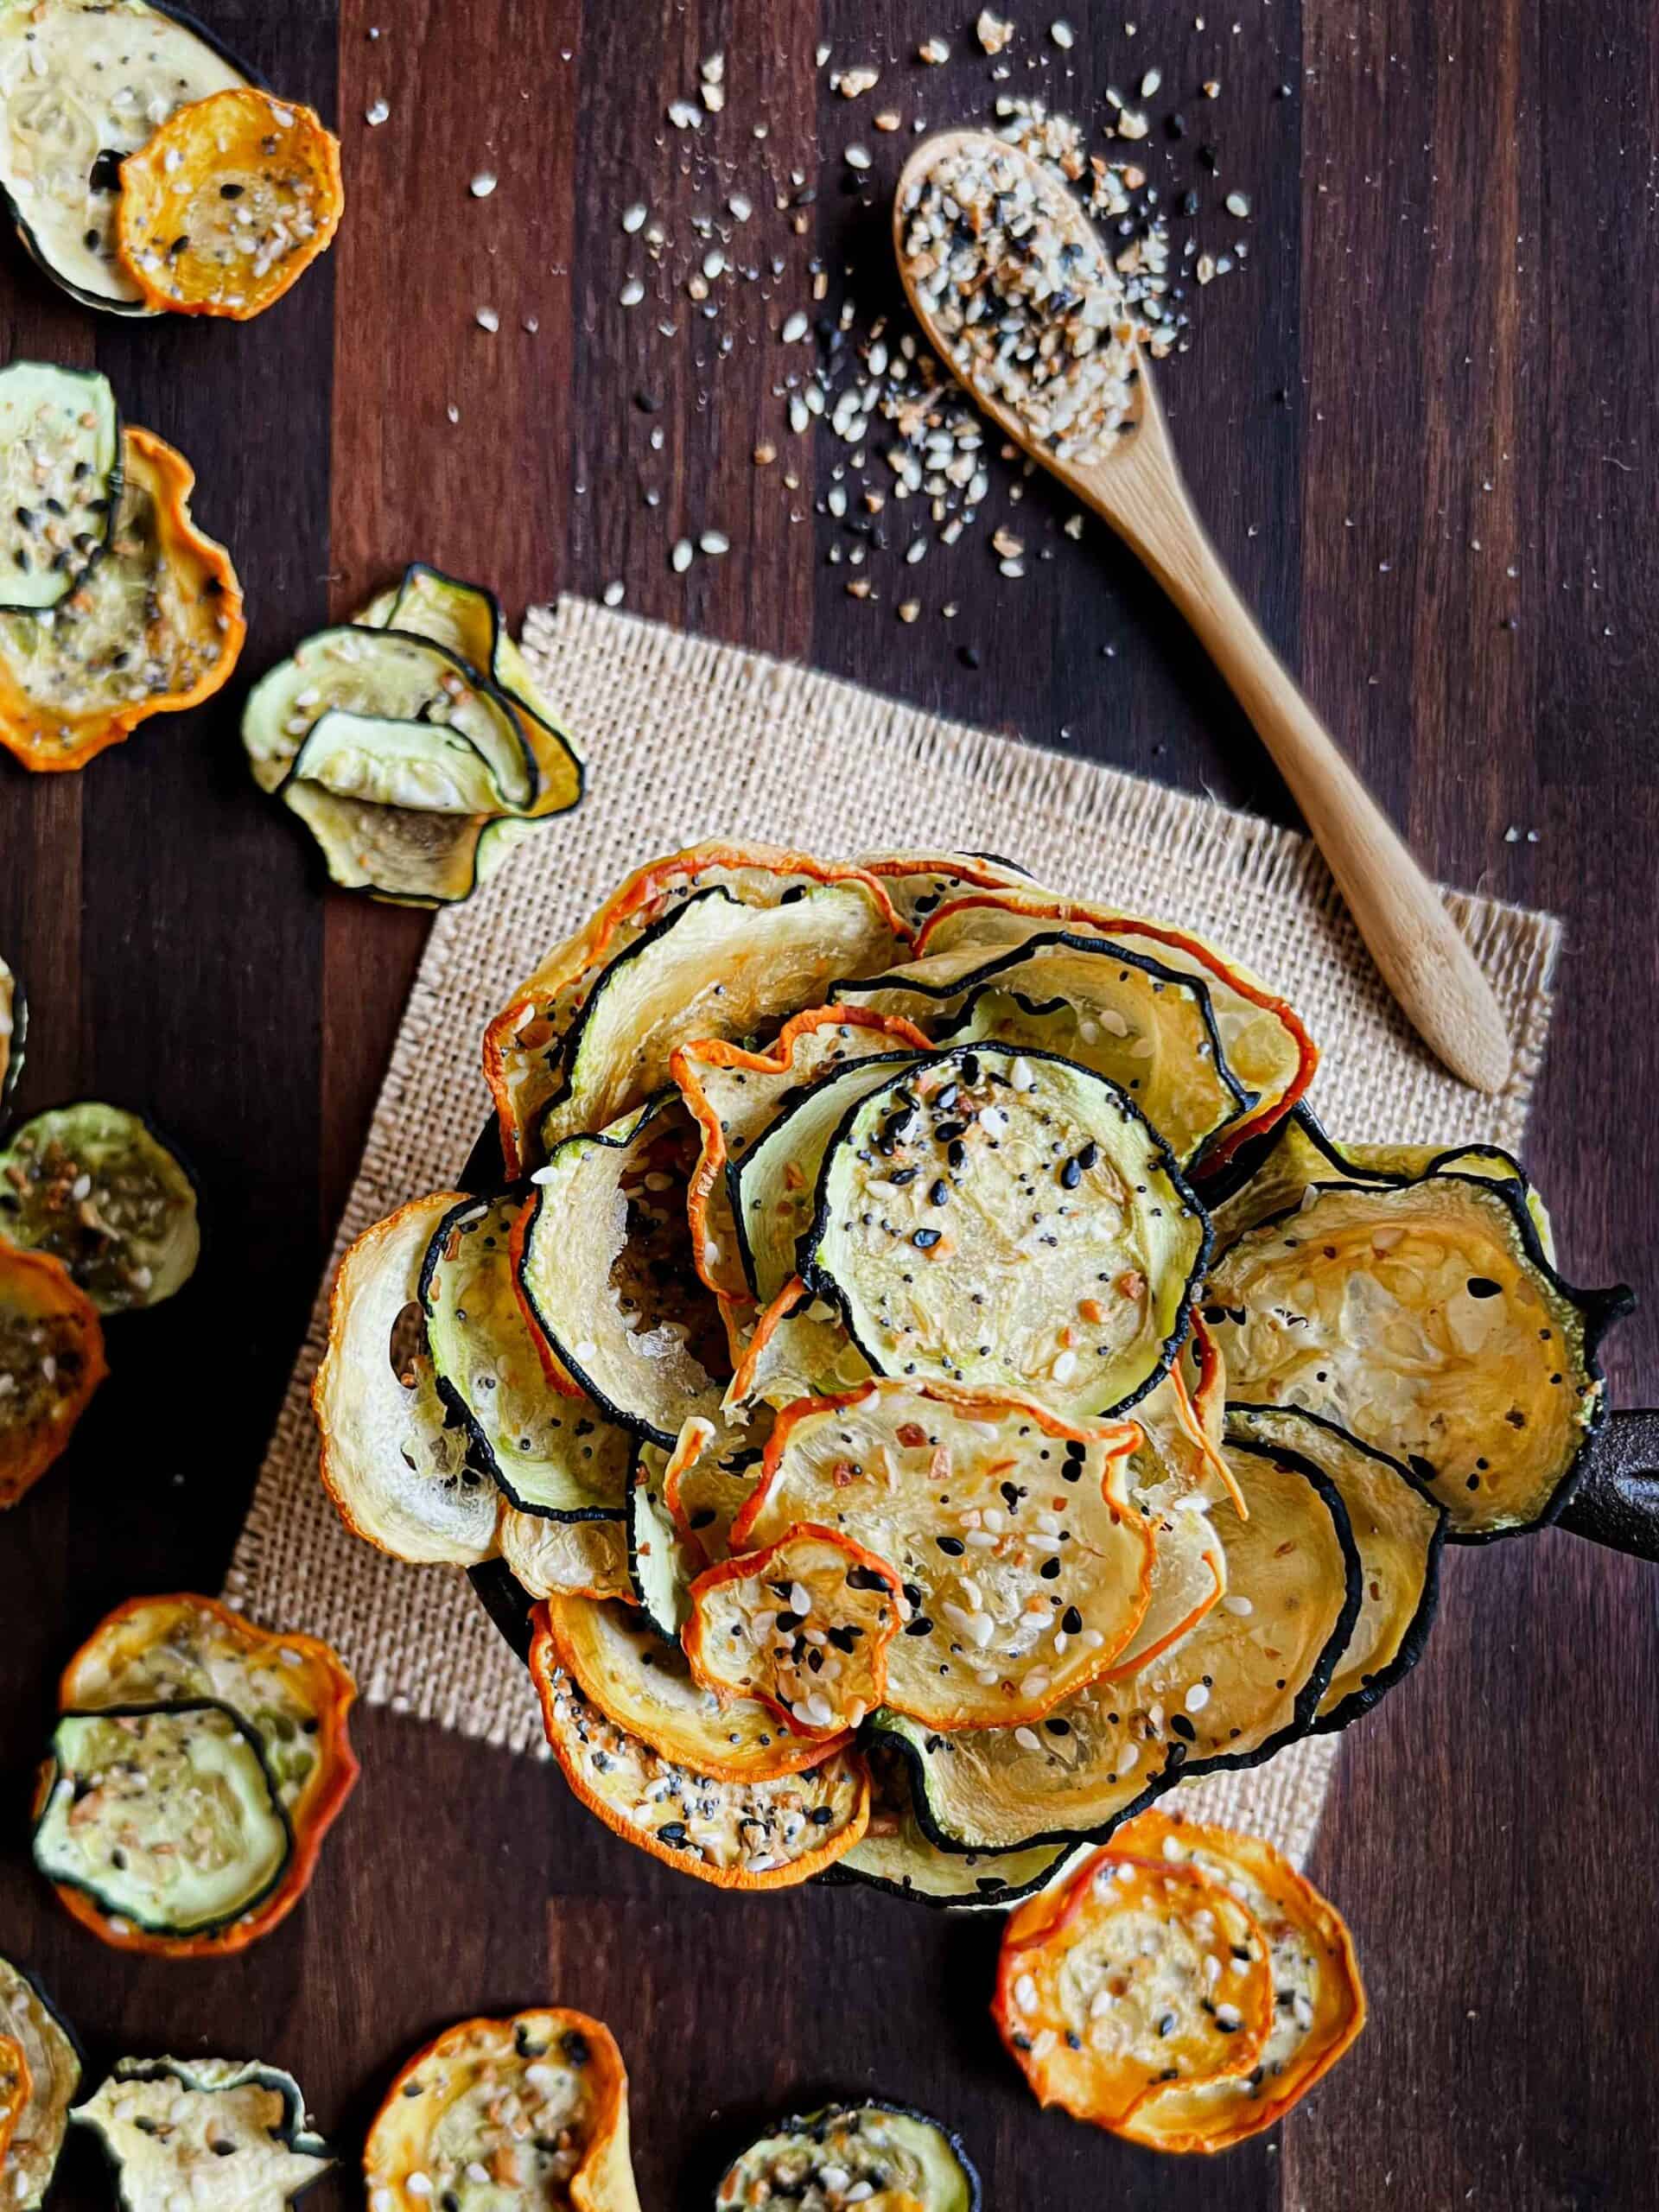 Everything bagel spice zucchini chips in a small cast iron pan sitting on burlap and a wooden cutting board with chips all around.